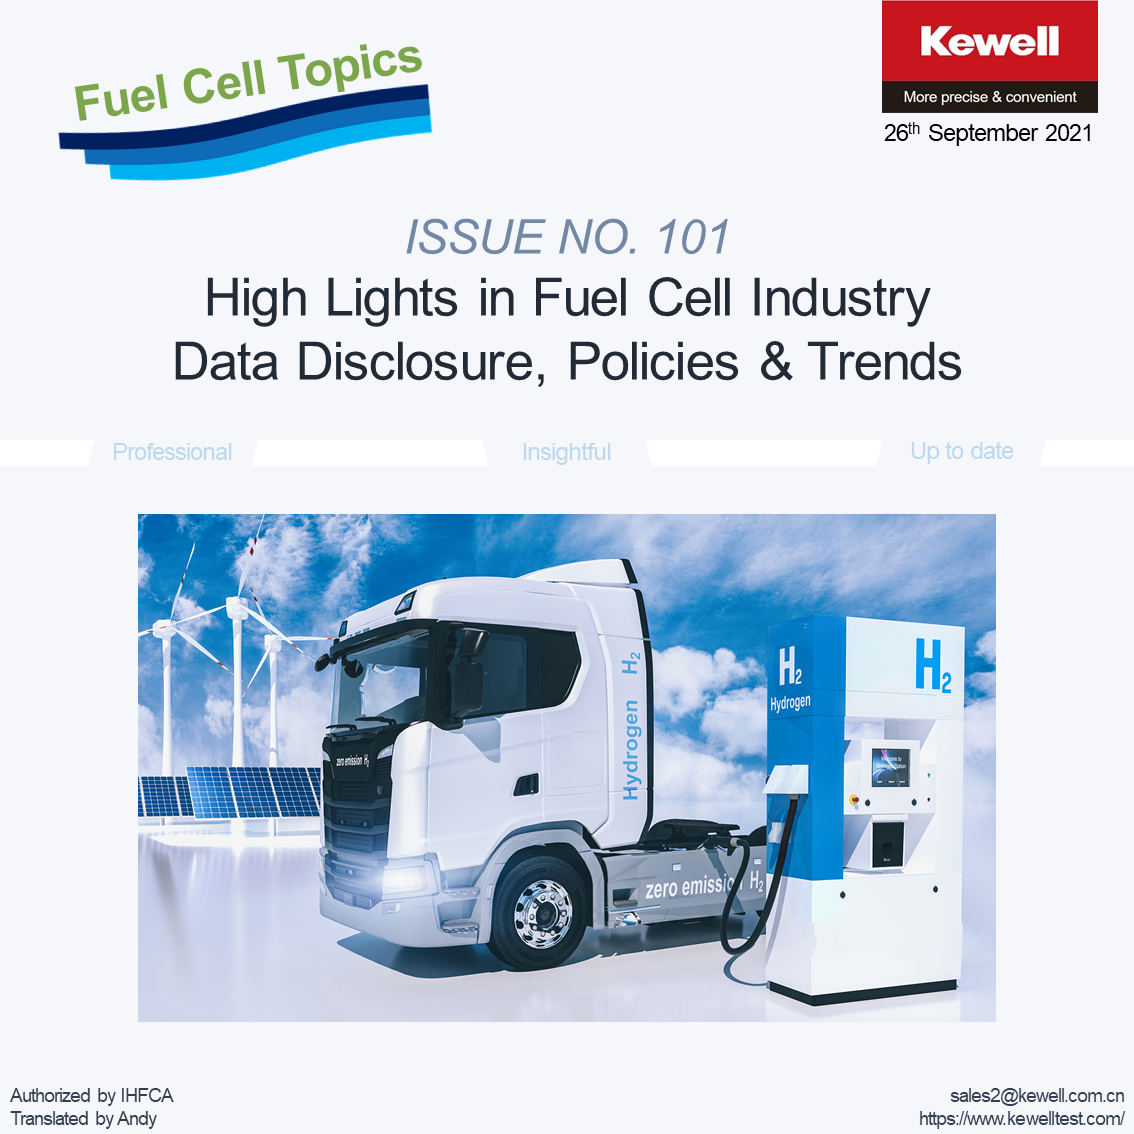 Fuel Cell Topics: ISSUE NO. 101 High Lights in Fuel Cell Industry